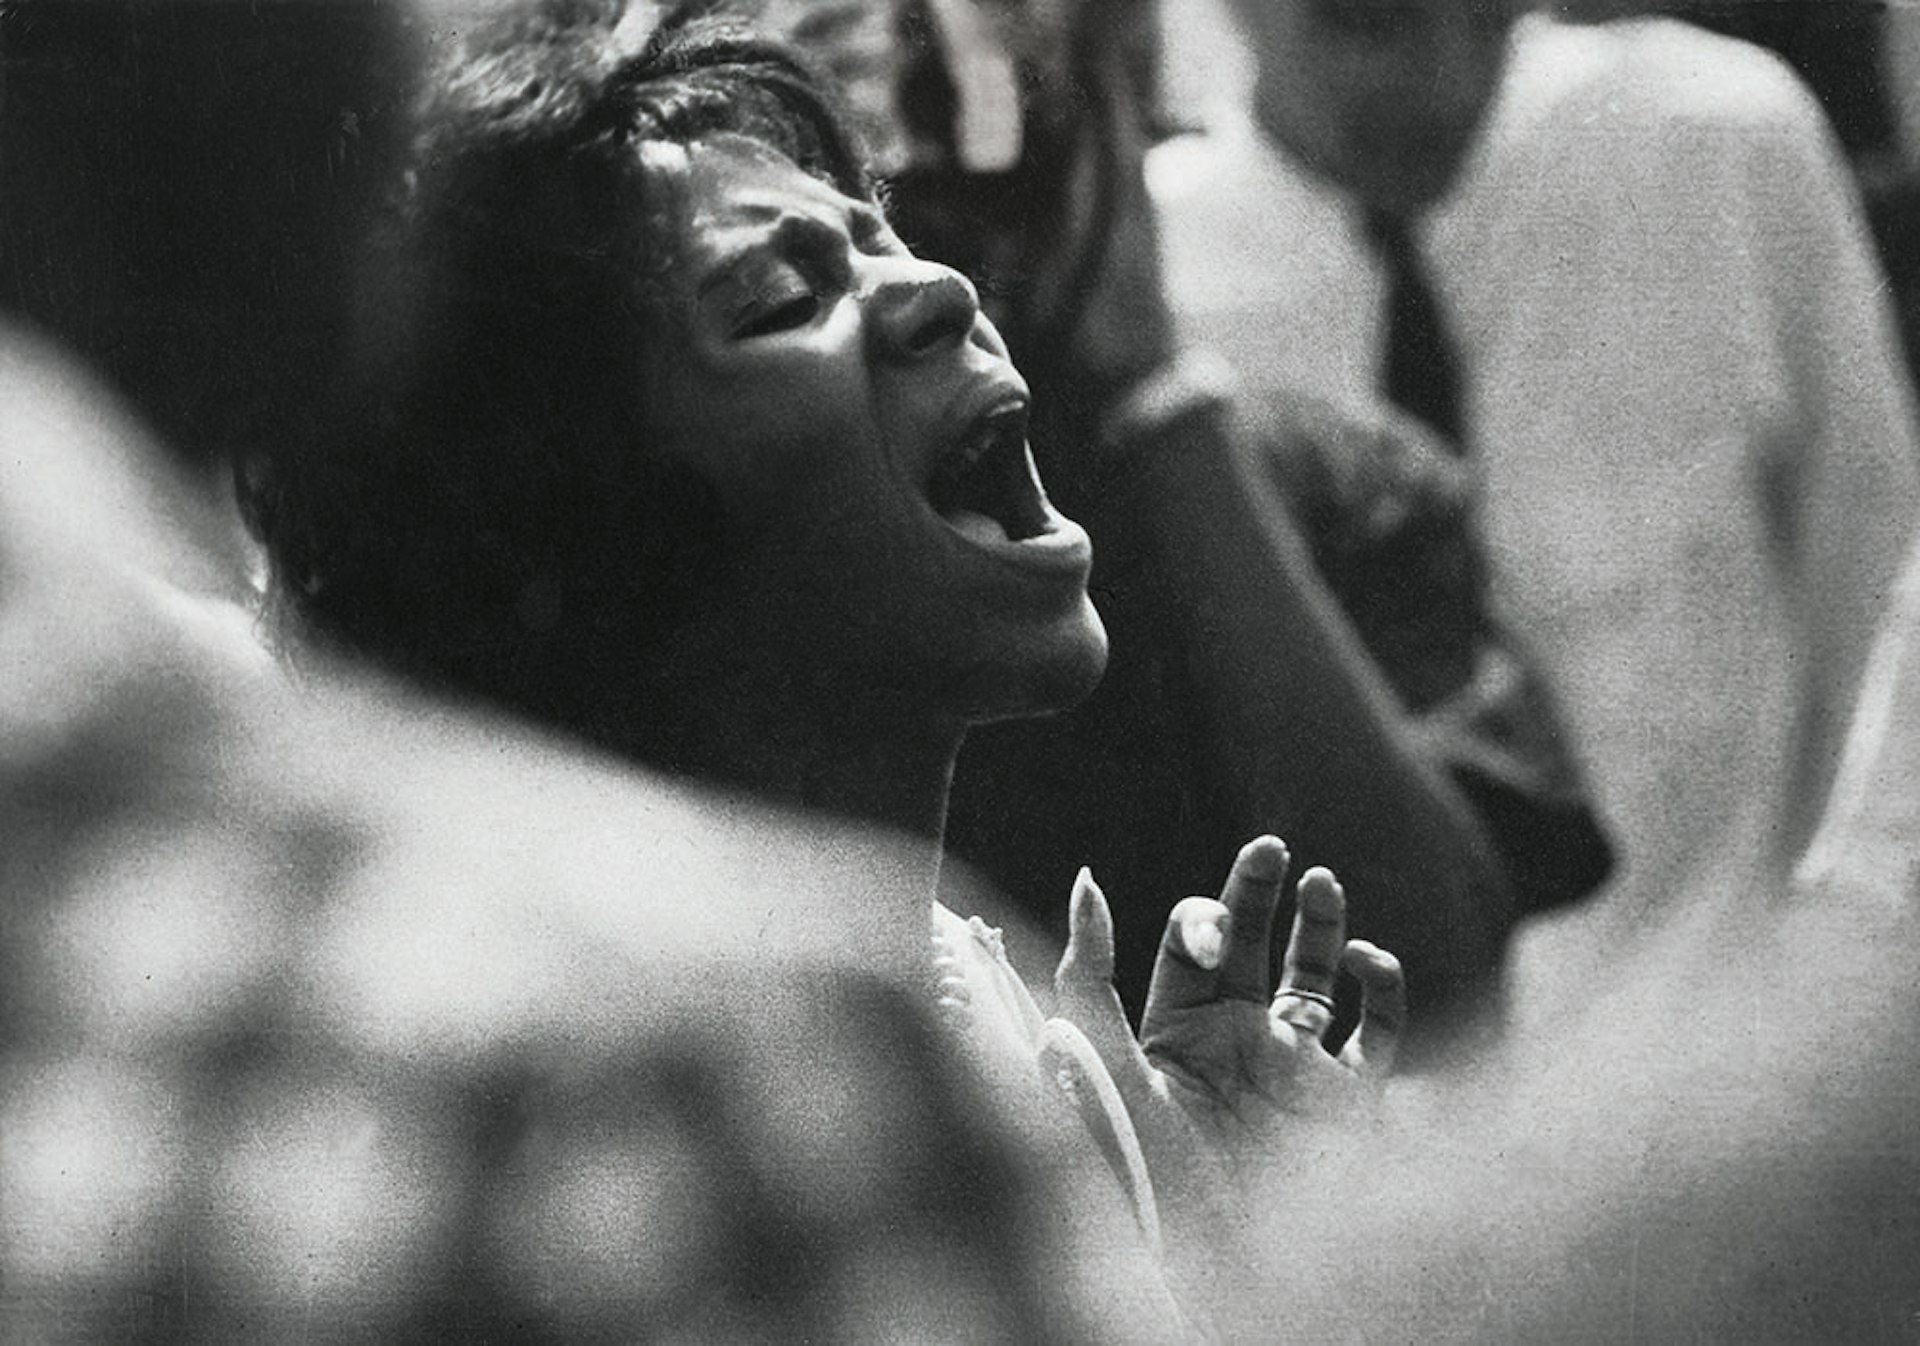 Woman Shouting by Ray Francis (1963); Courtesy Schiffer Publishing.